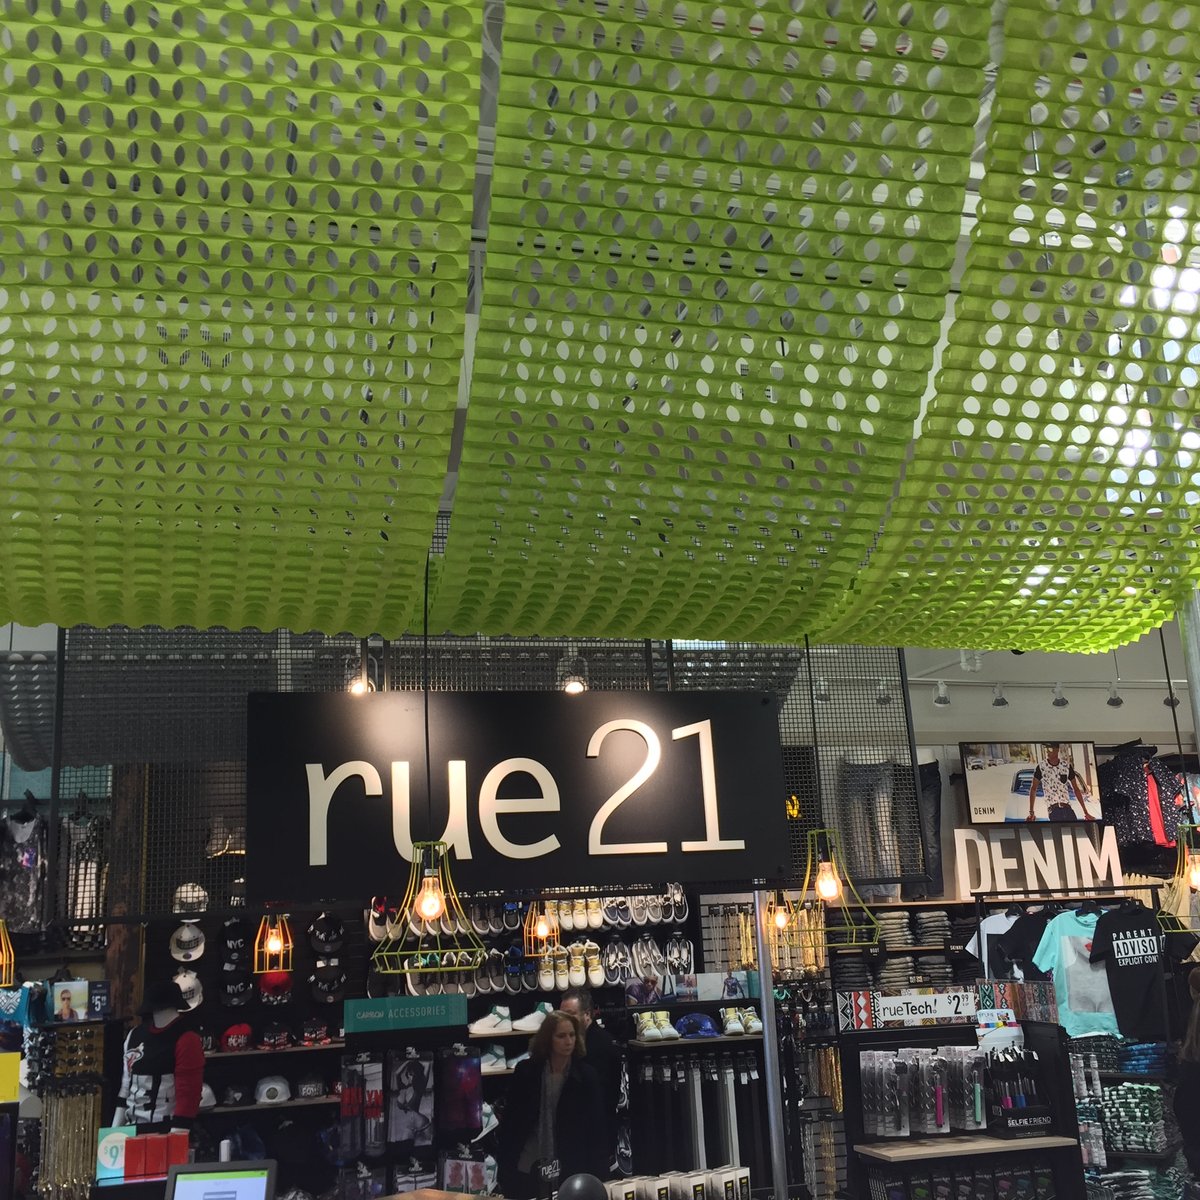 Rue21 closing hundreds of stores nationwide, including 4 in